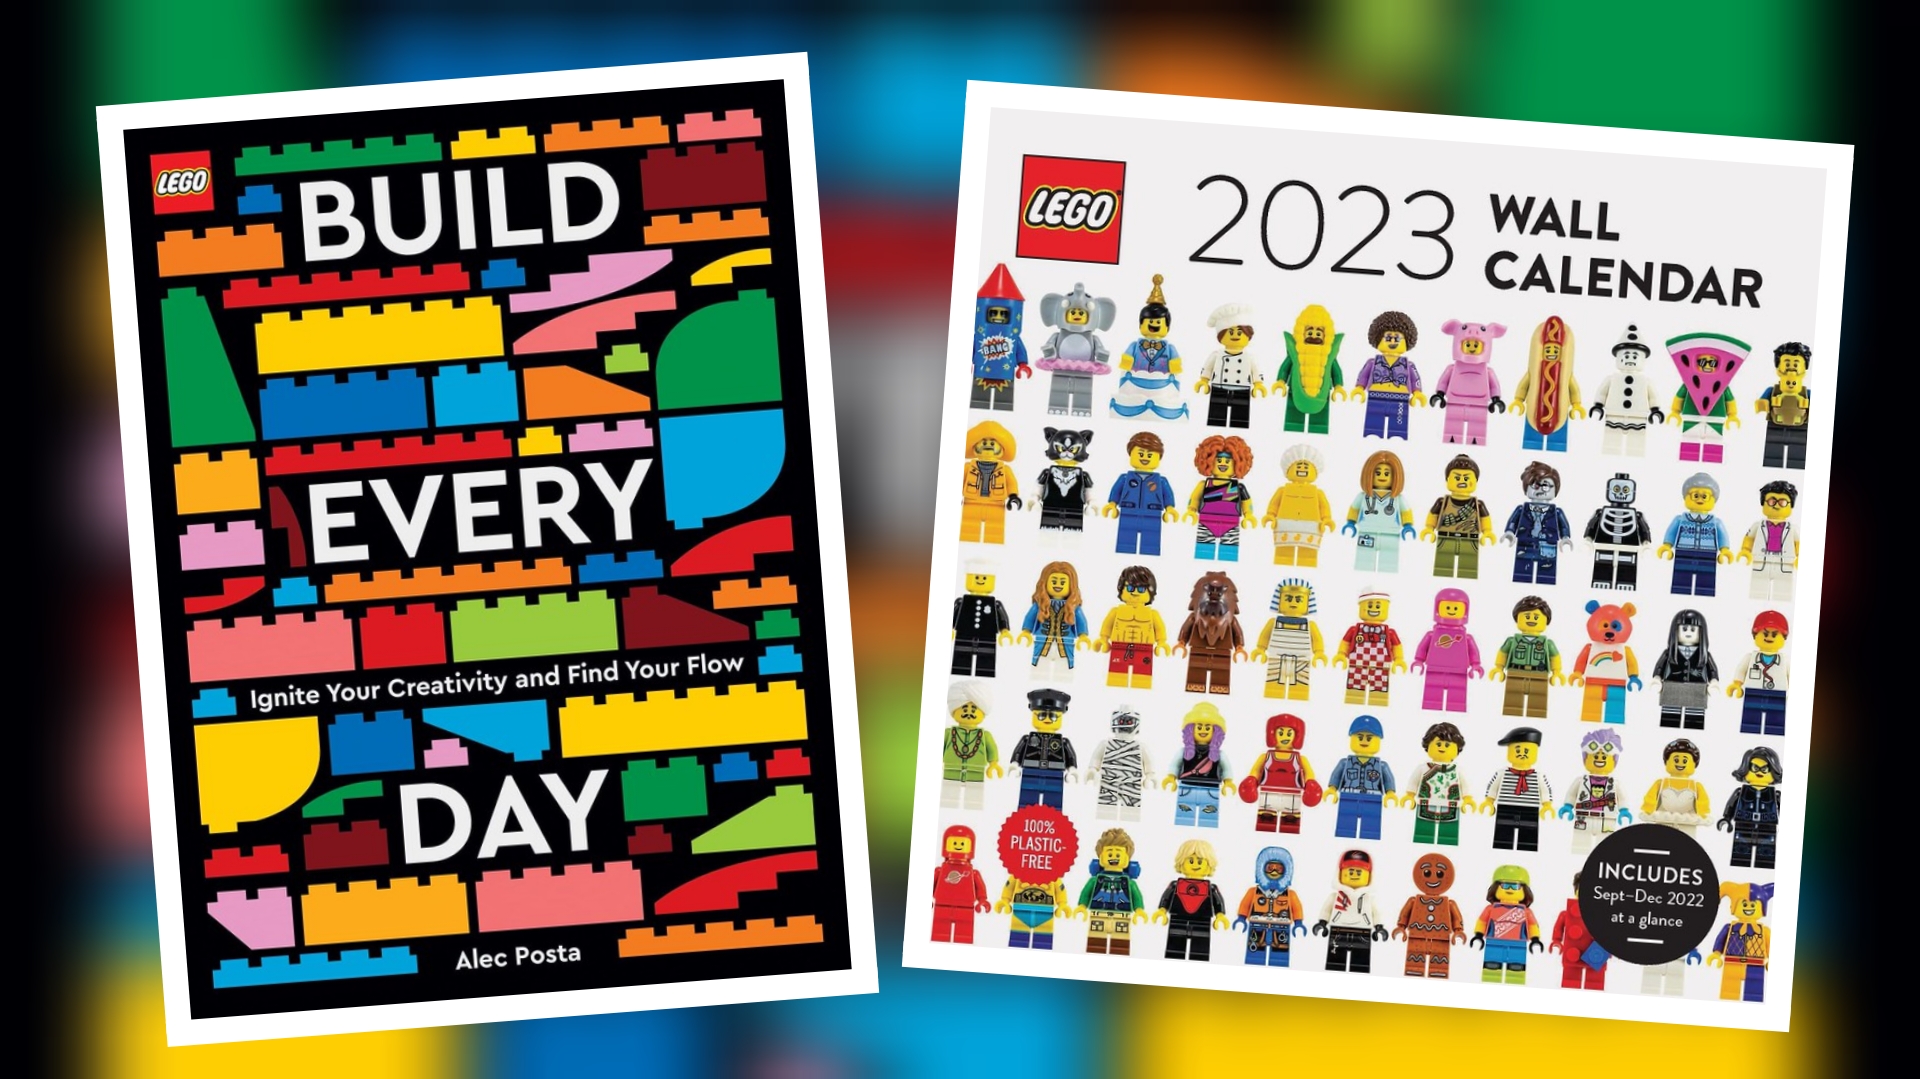 LEGO Build Every Day Book And 2023 Wall Calendar Revealed The Brick Post 